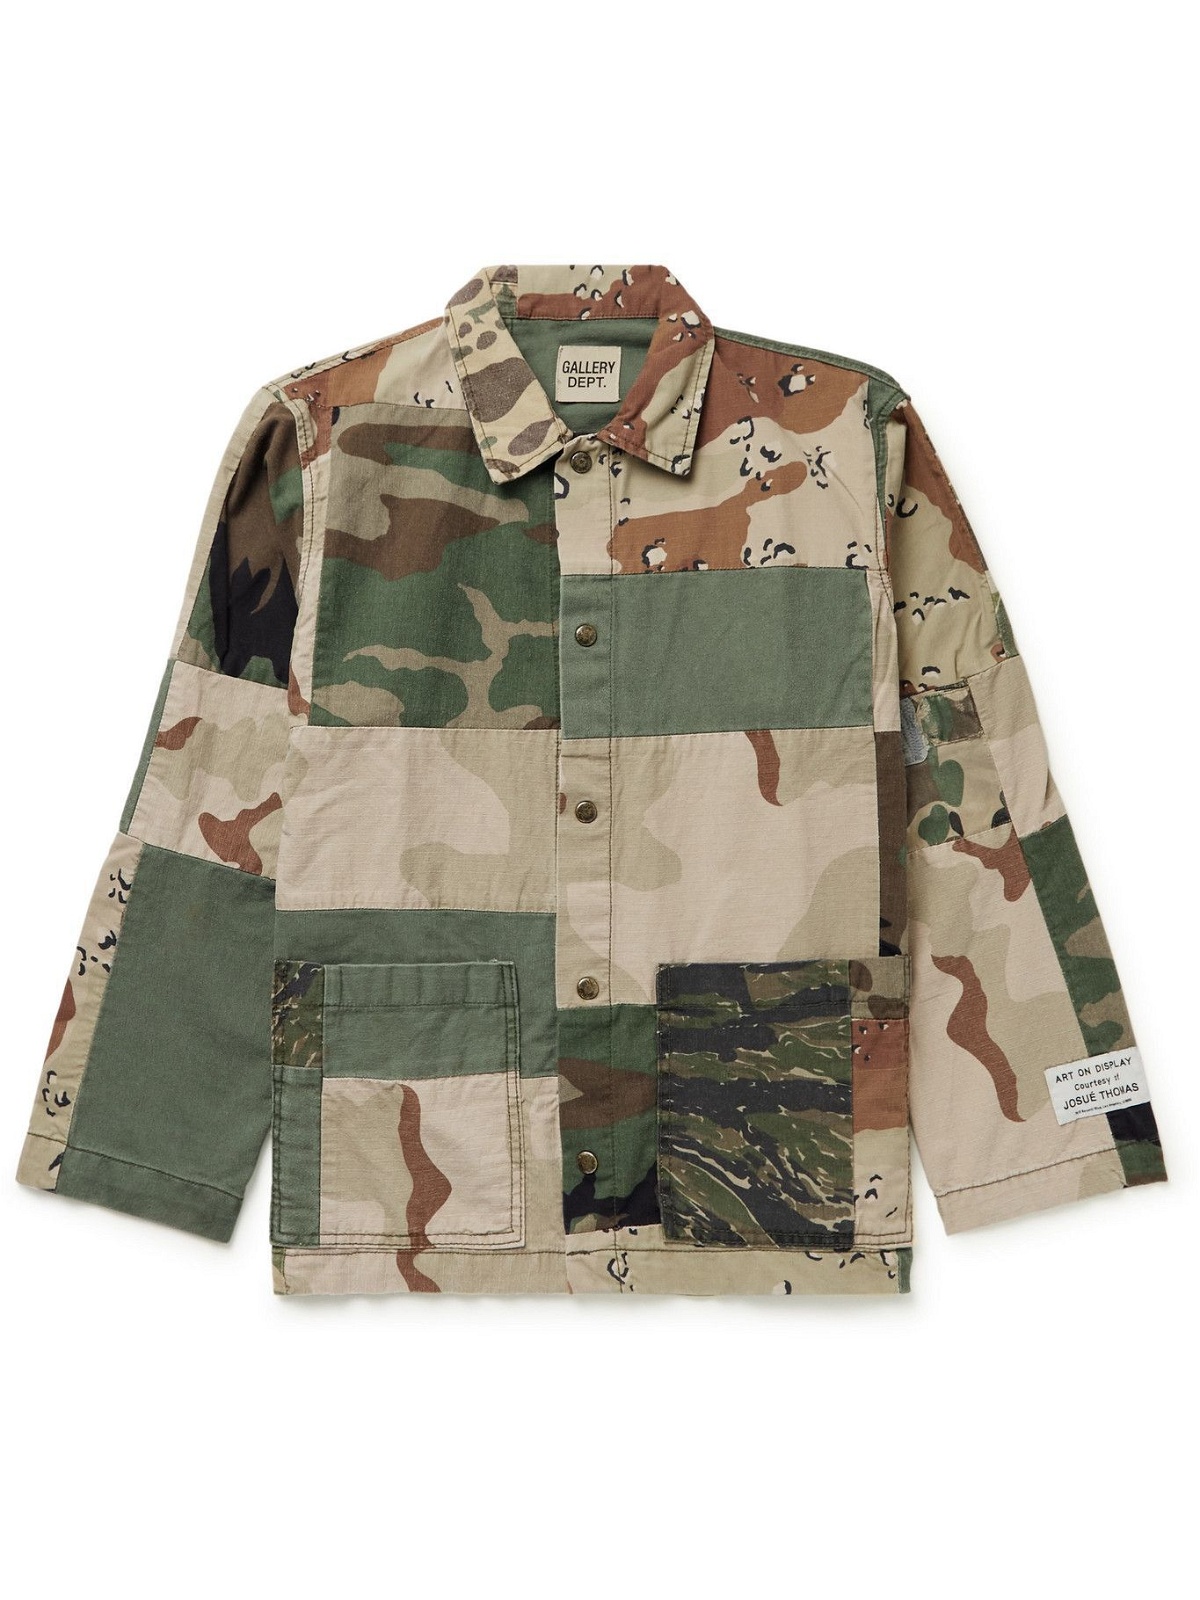 Gallery Dept. - Patchwork Camouflage-Print Cotton-Twill Chore Jacket ...